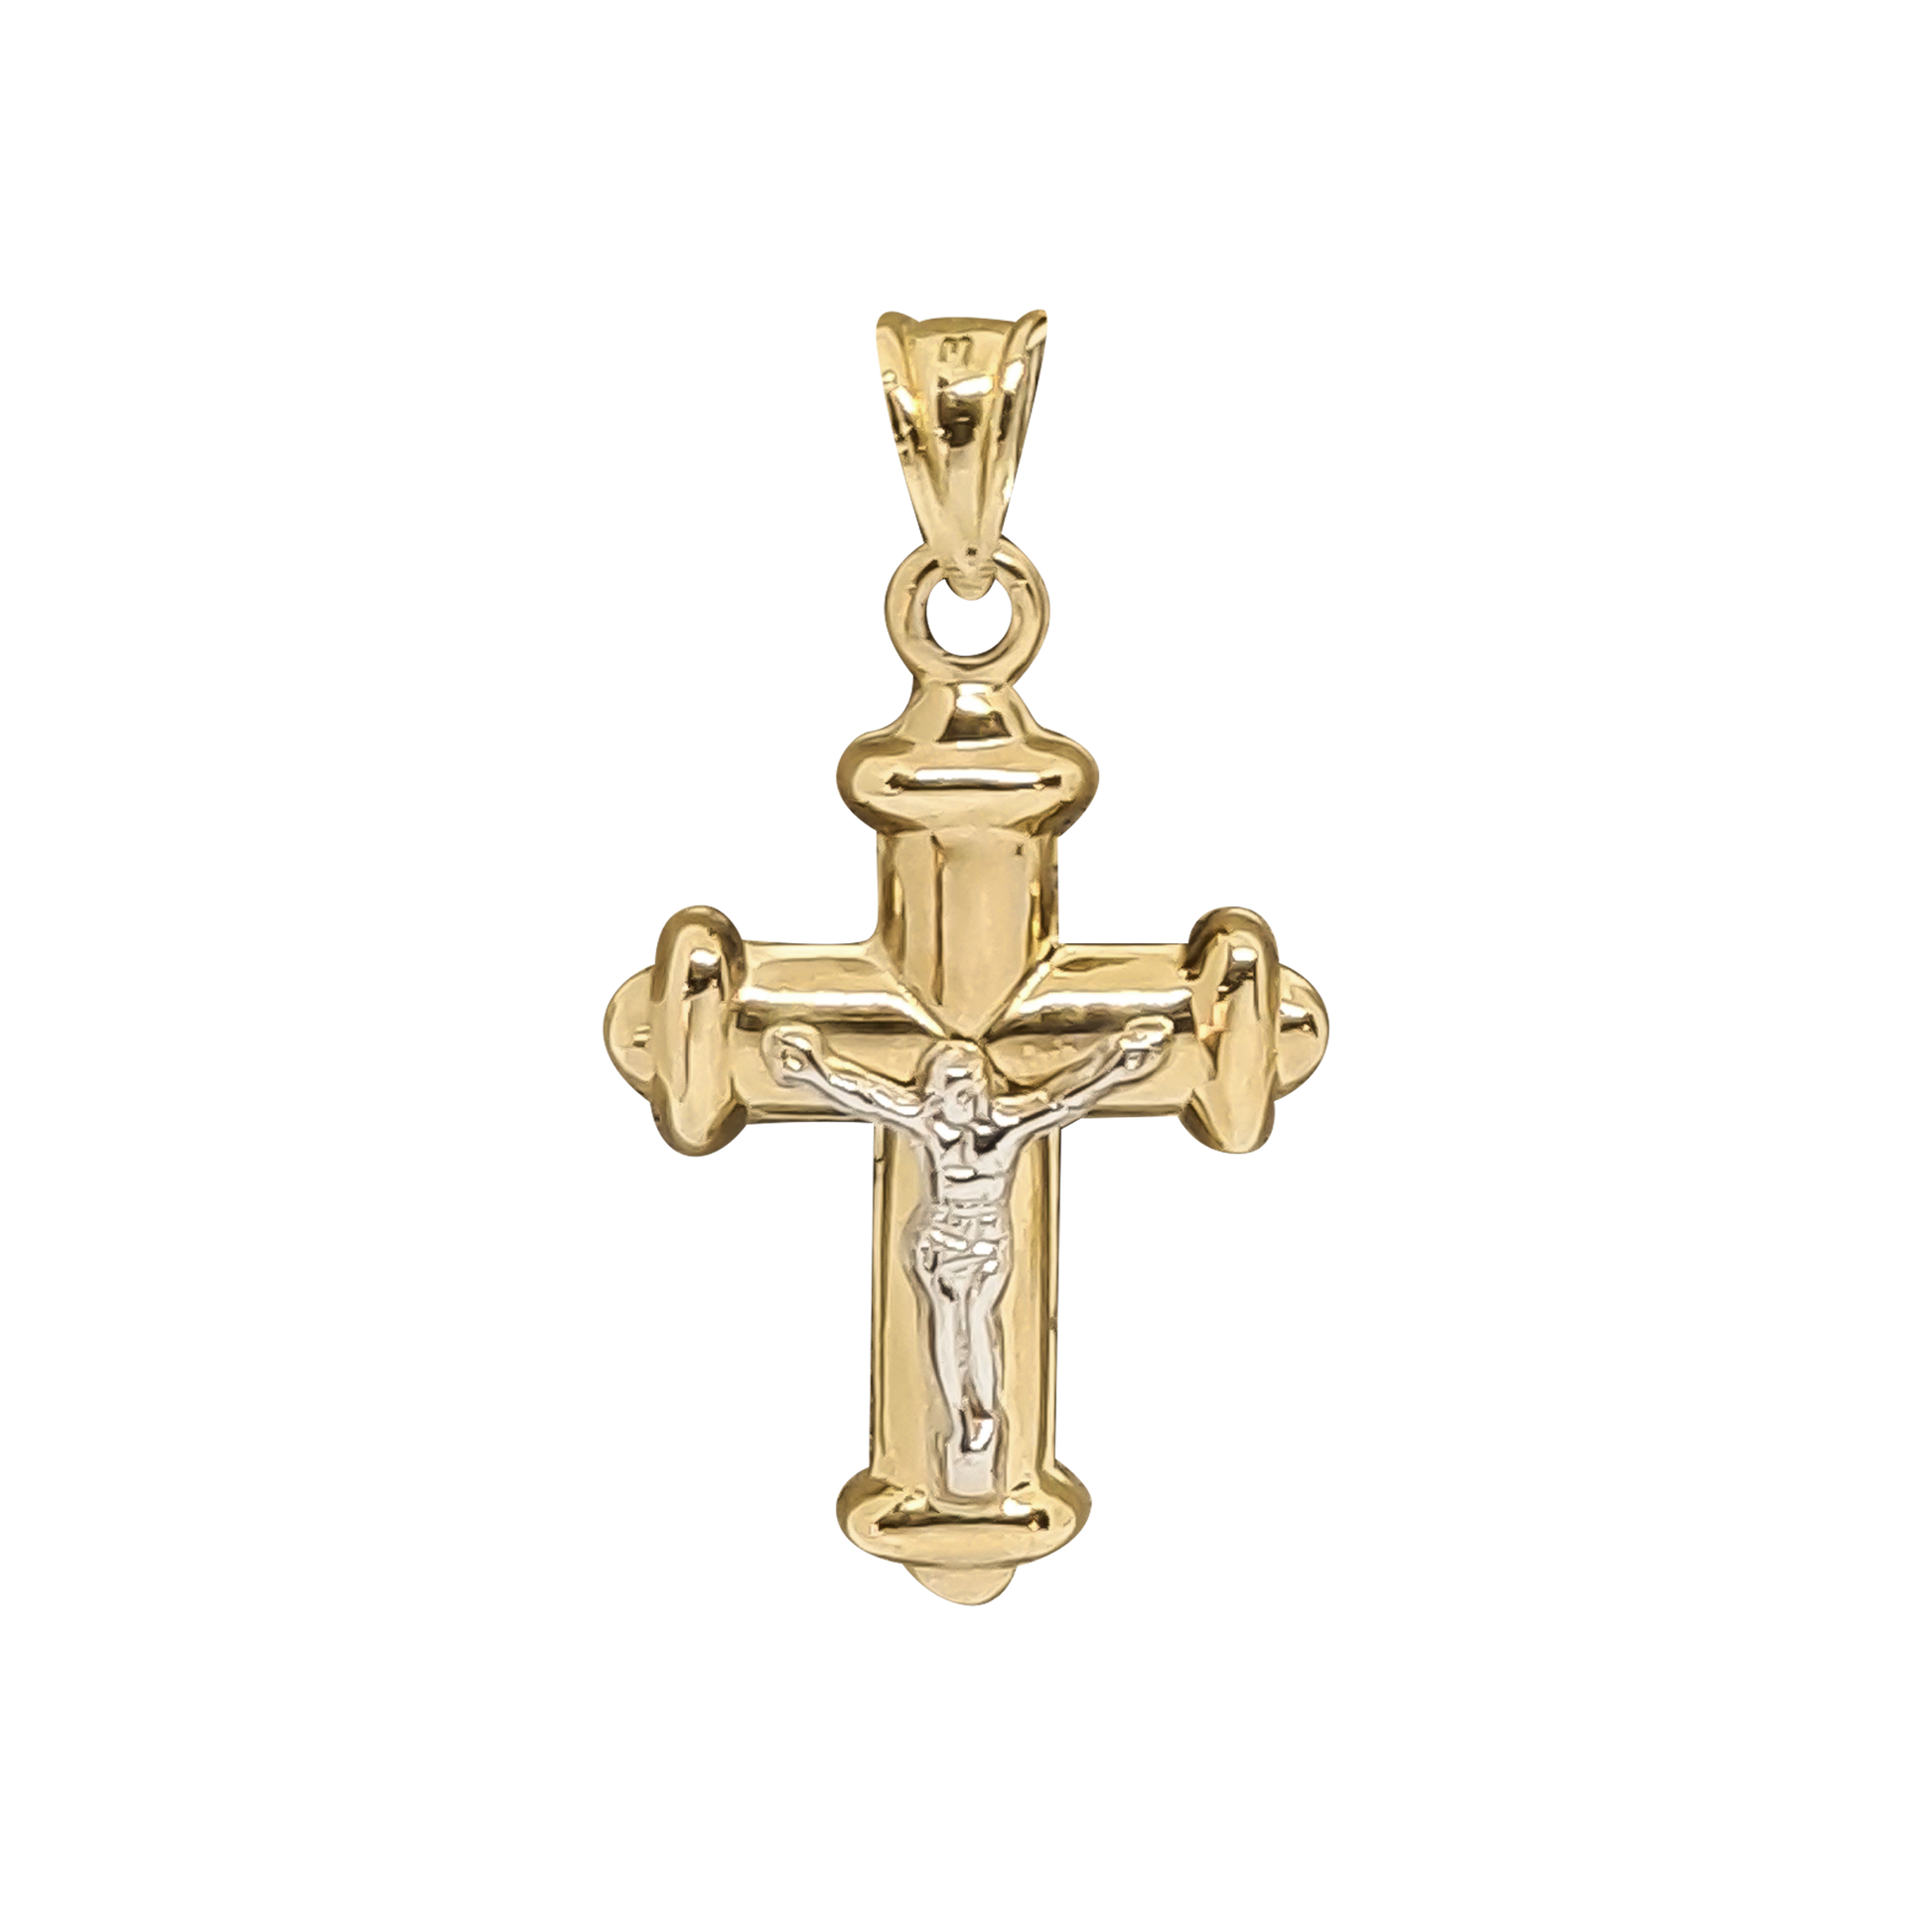 220mm Crucifix Pendant in 9ct Yellow Gold.